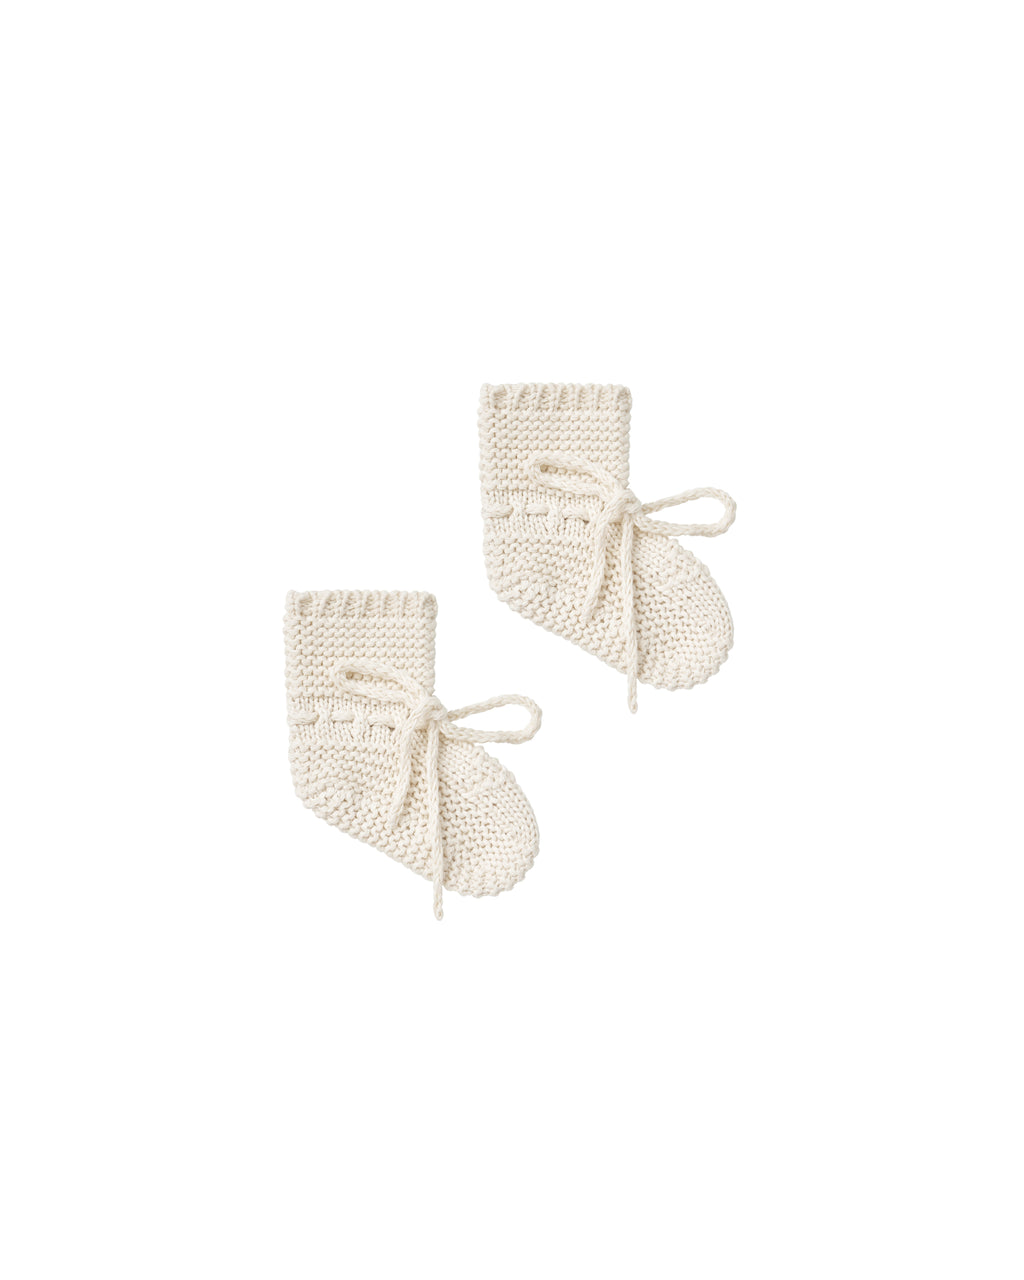 Quincy Mae Knit Booties - Natural